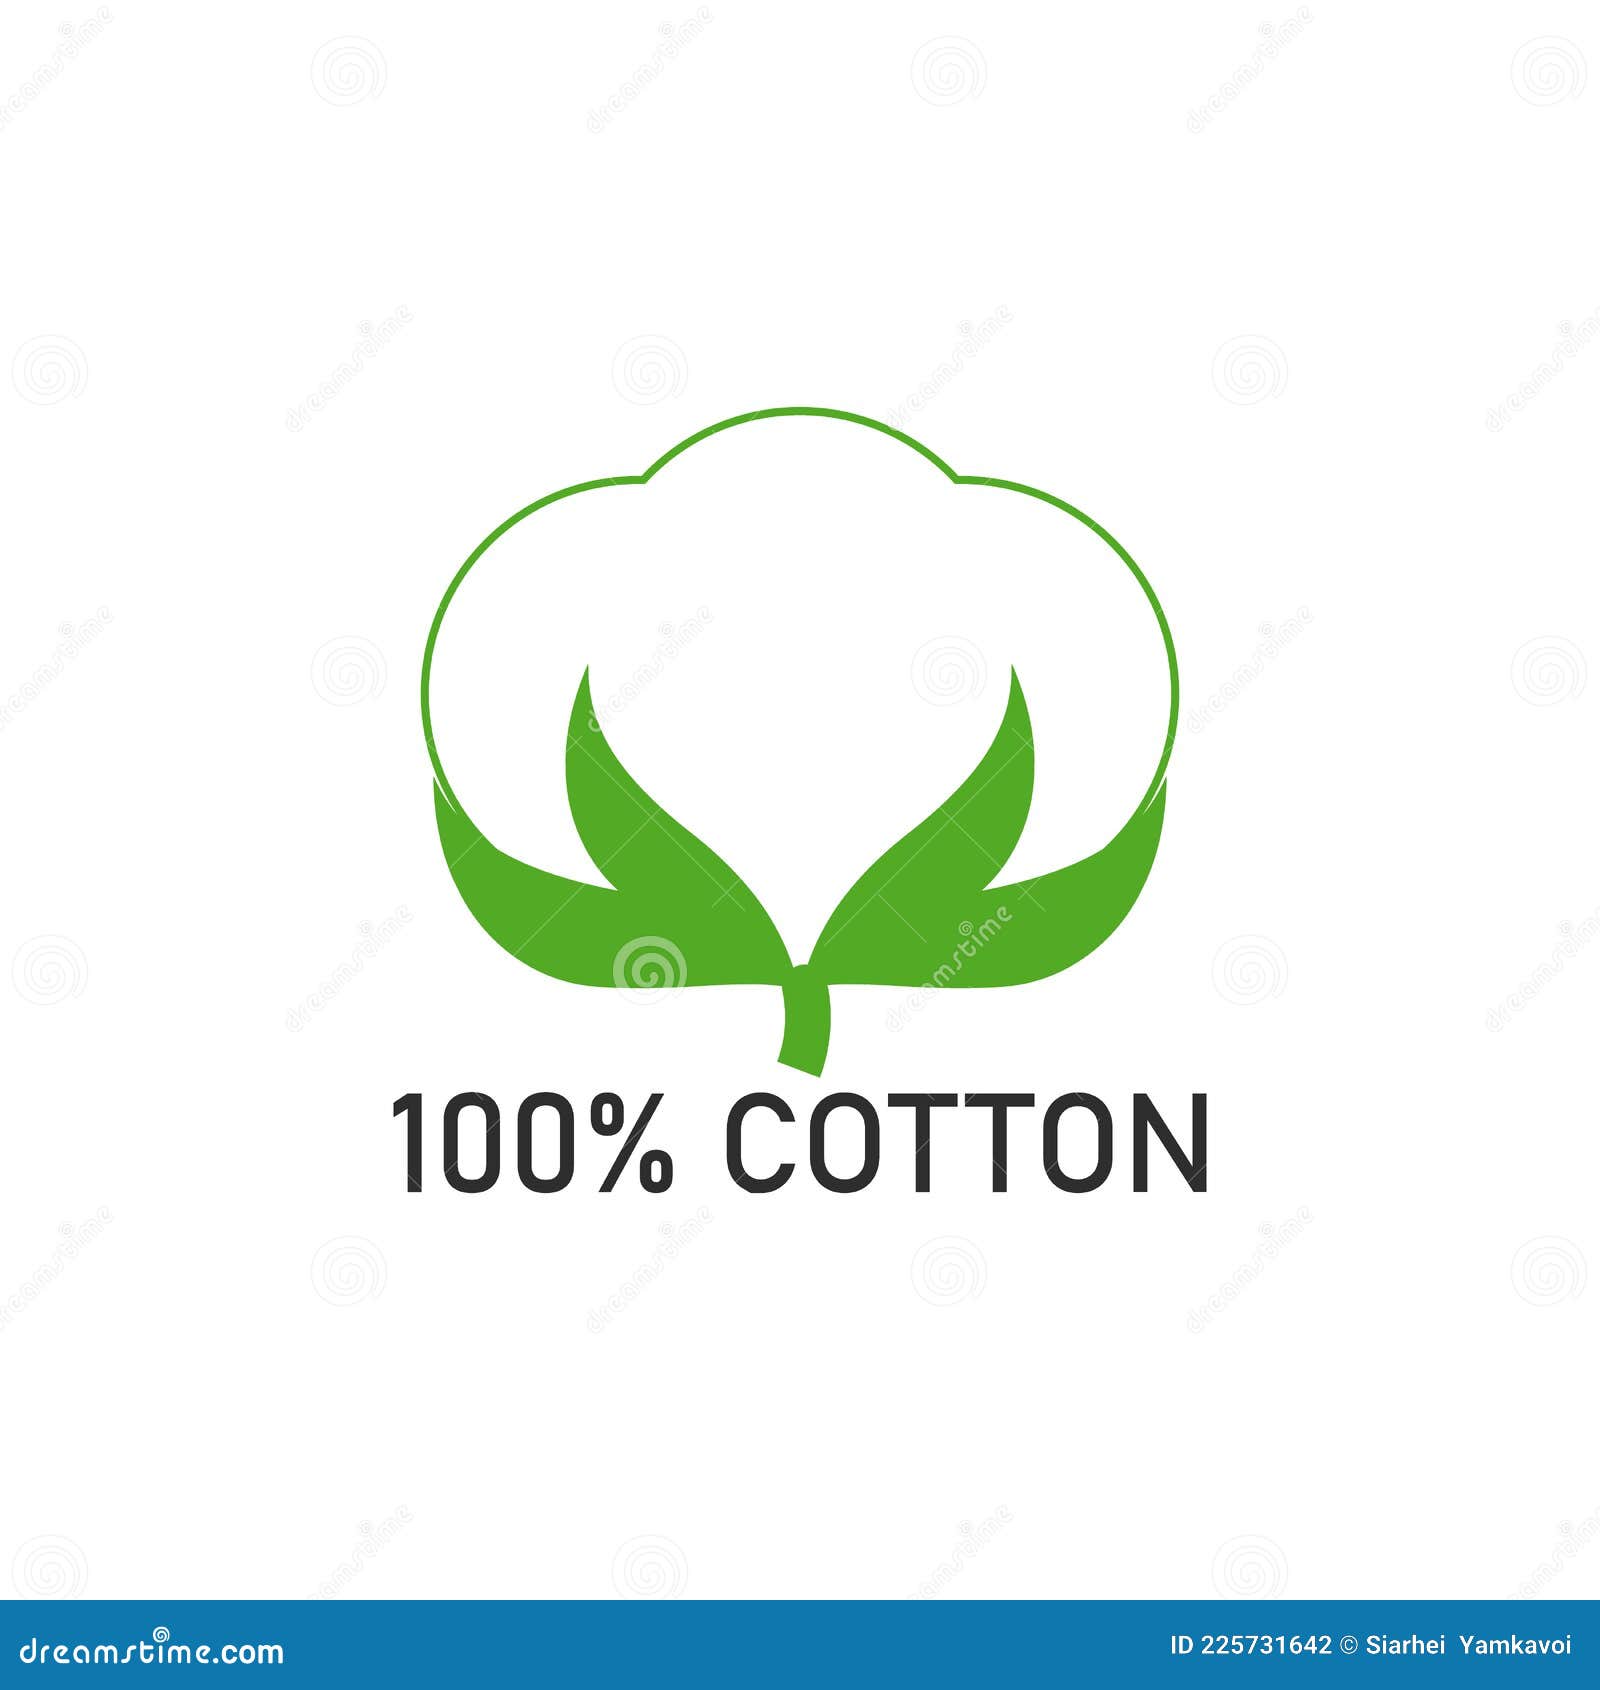 100 Percent Cotton Fabric. Vector Label and Icon on Blank